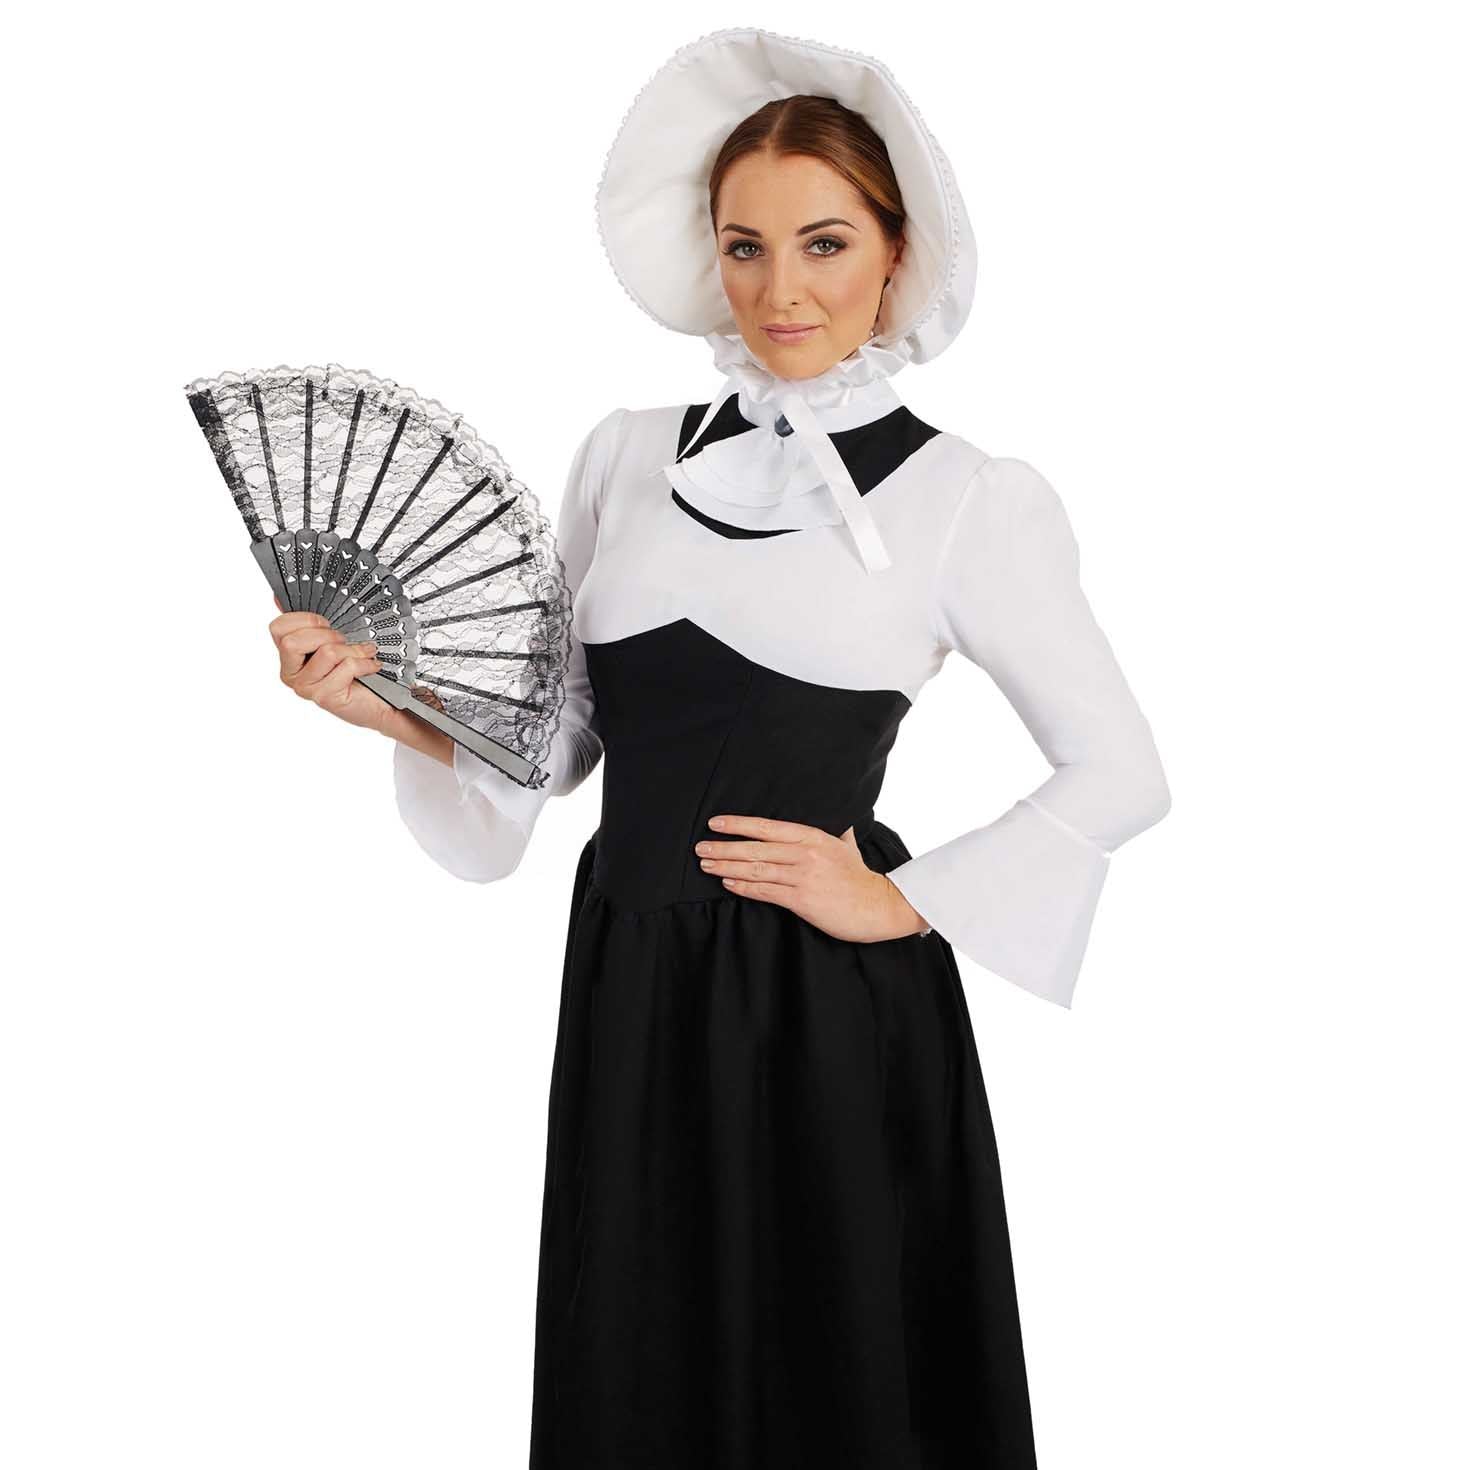 Victorian Lady fancy dress outfit